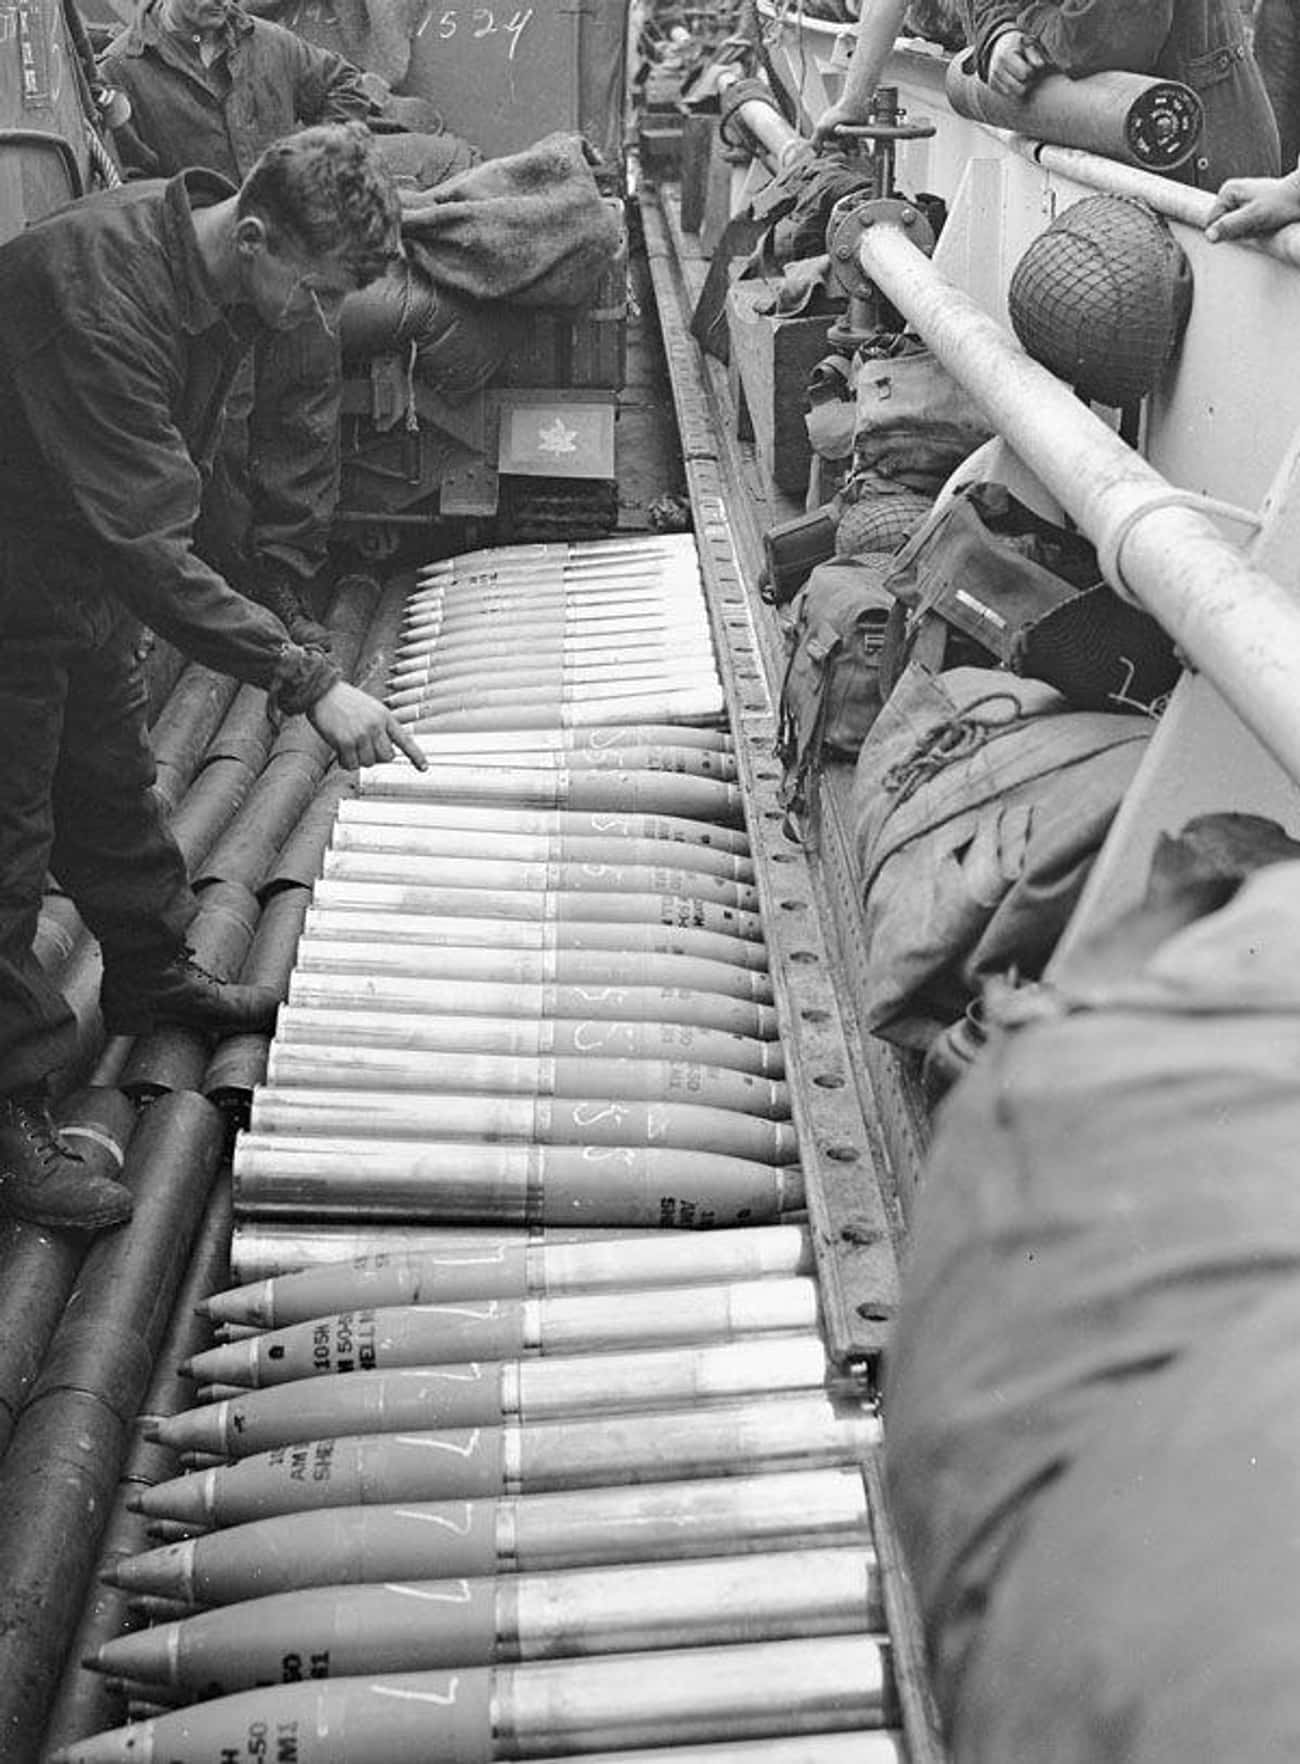 Canadian Artillery Aboard A Ship Tank Counting Out Shells To Use On D-Day